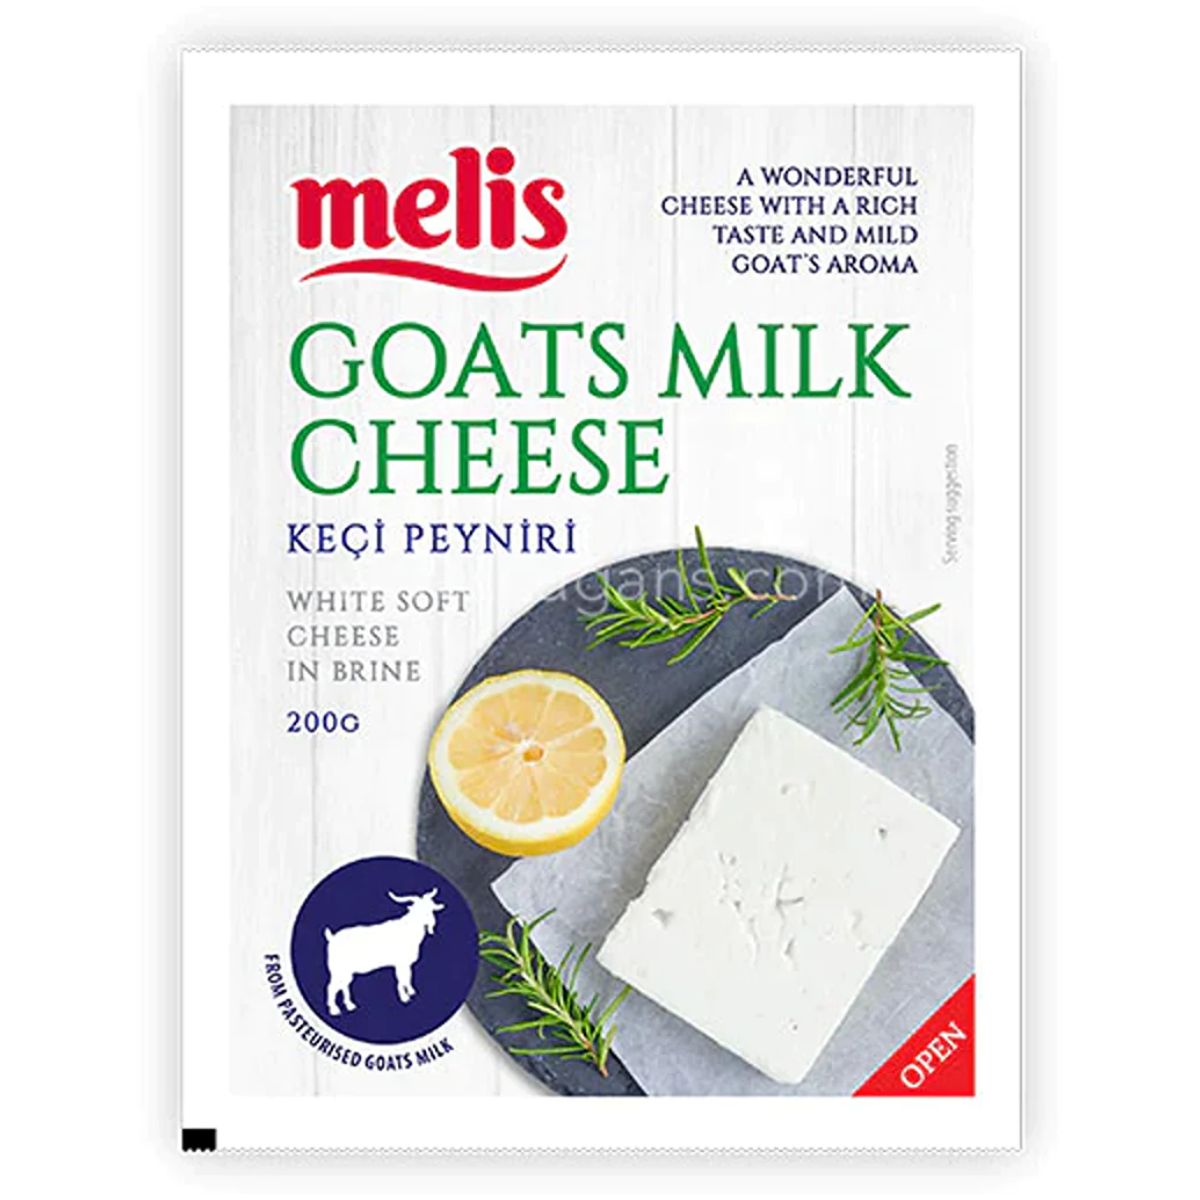 A package of Melis - Goats Milk Cheese - 200g shown on the label.